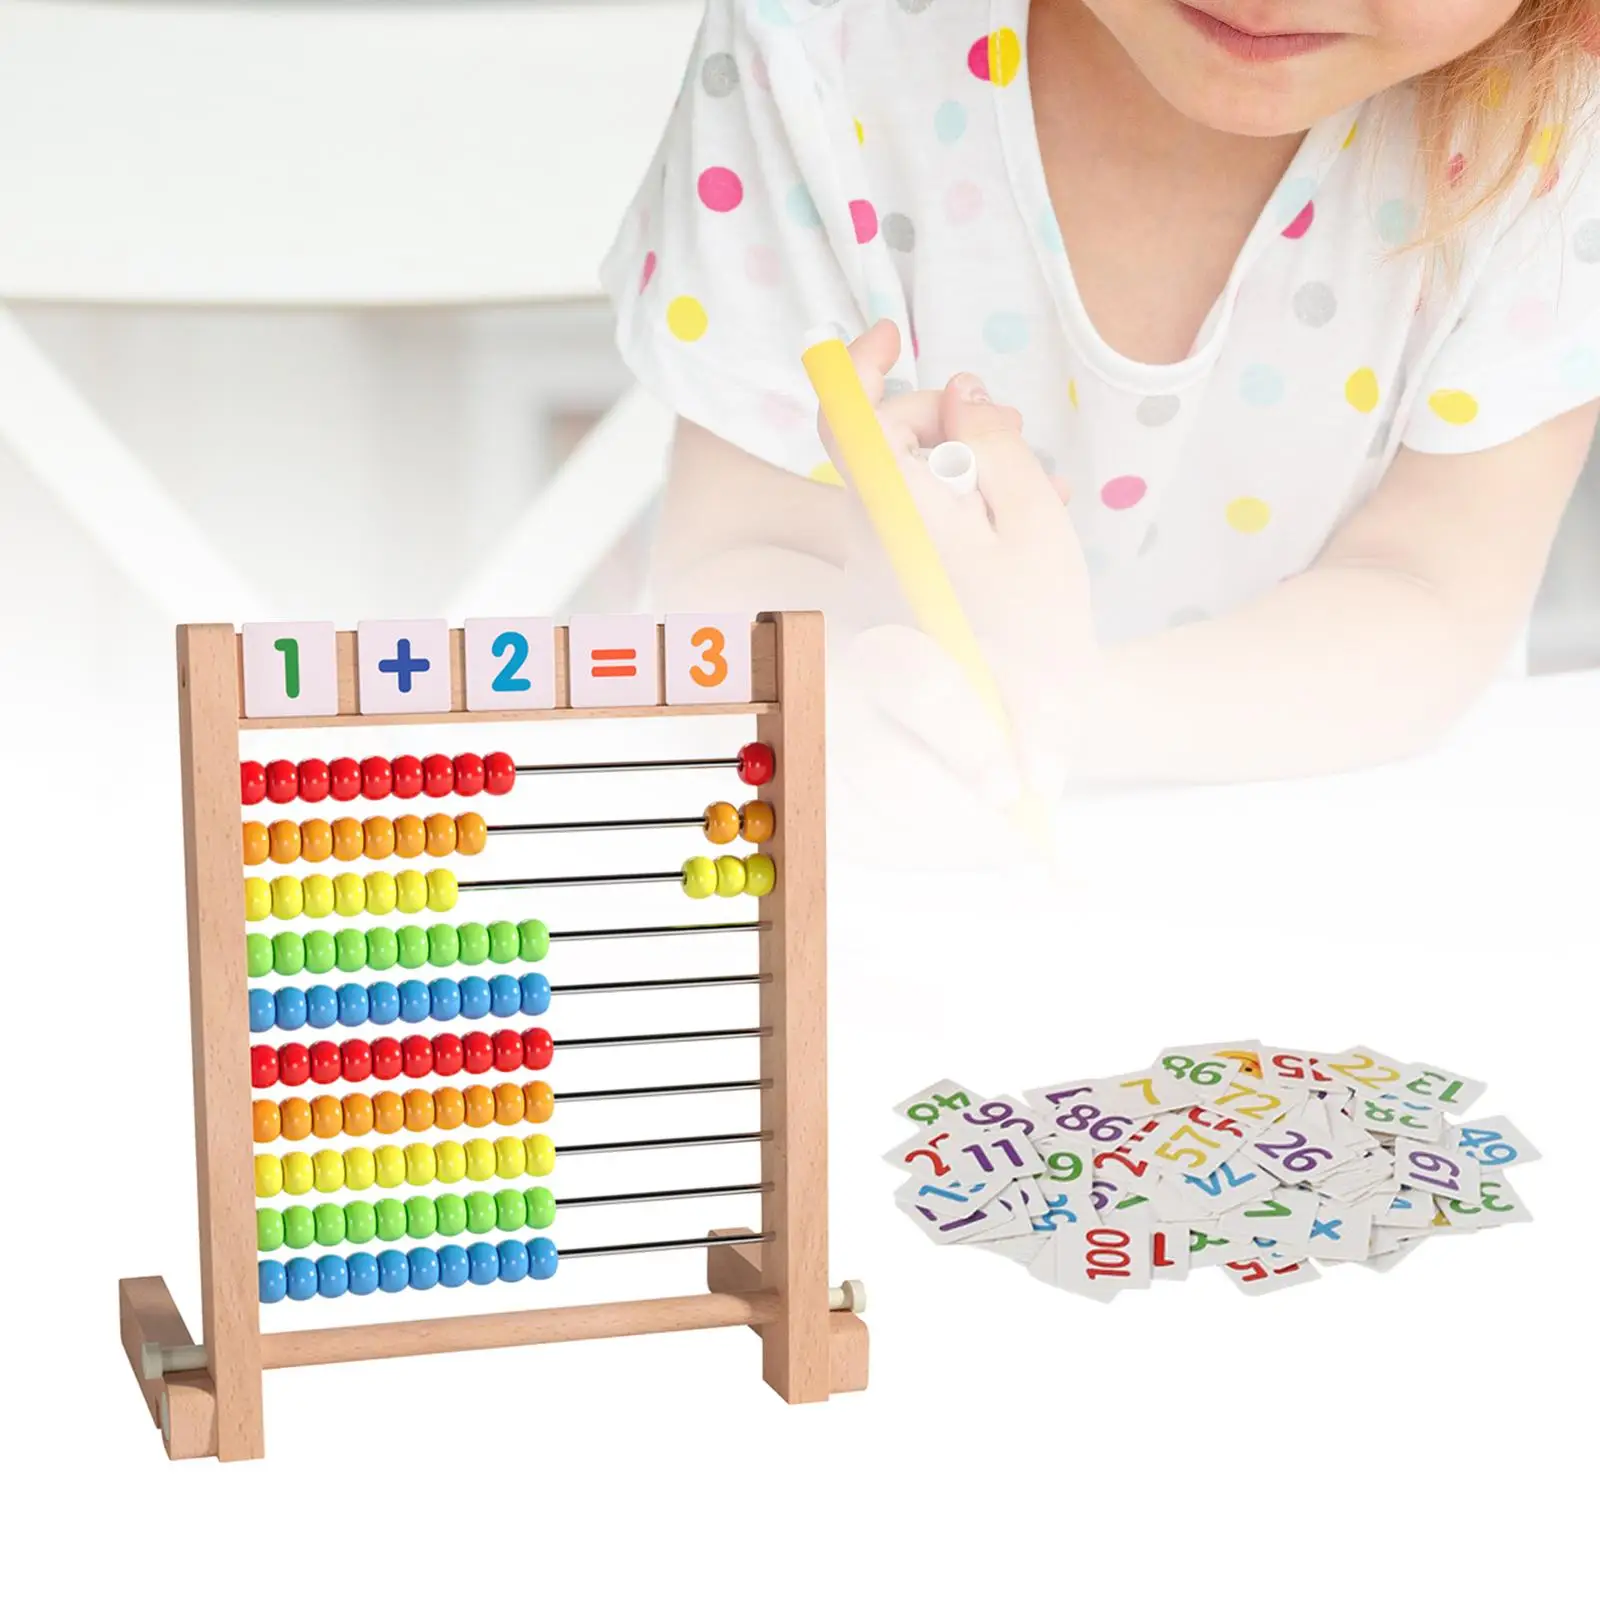 Wooden Abacus Ten Frame Set Smooth Edges Educational Counting Frames Toy for Elementary Toddlers Kids Children Boys Girls